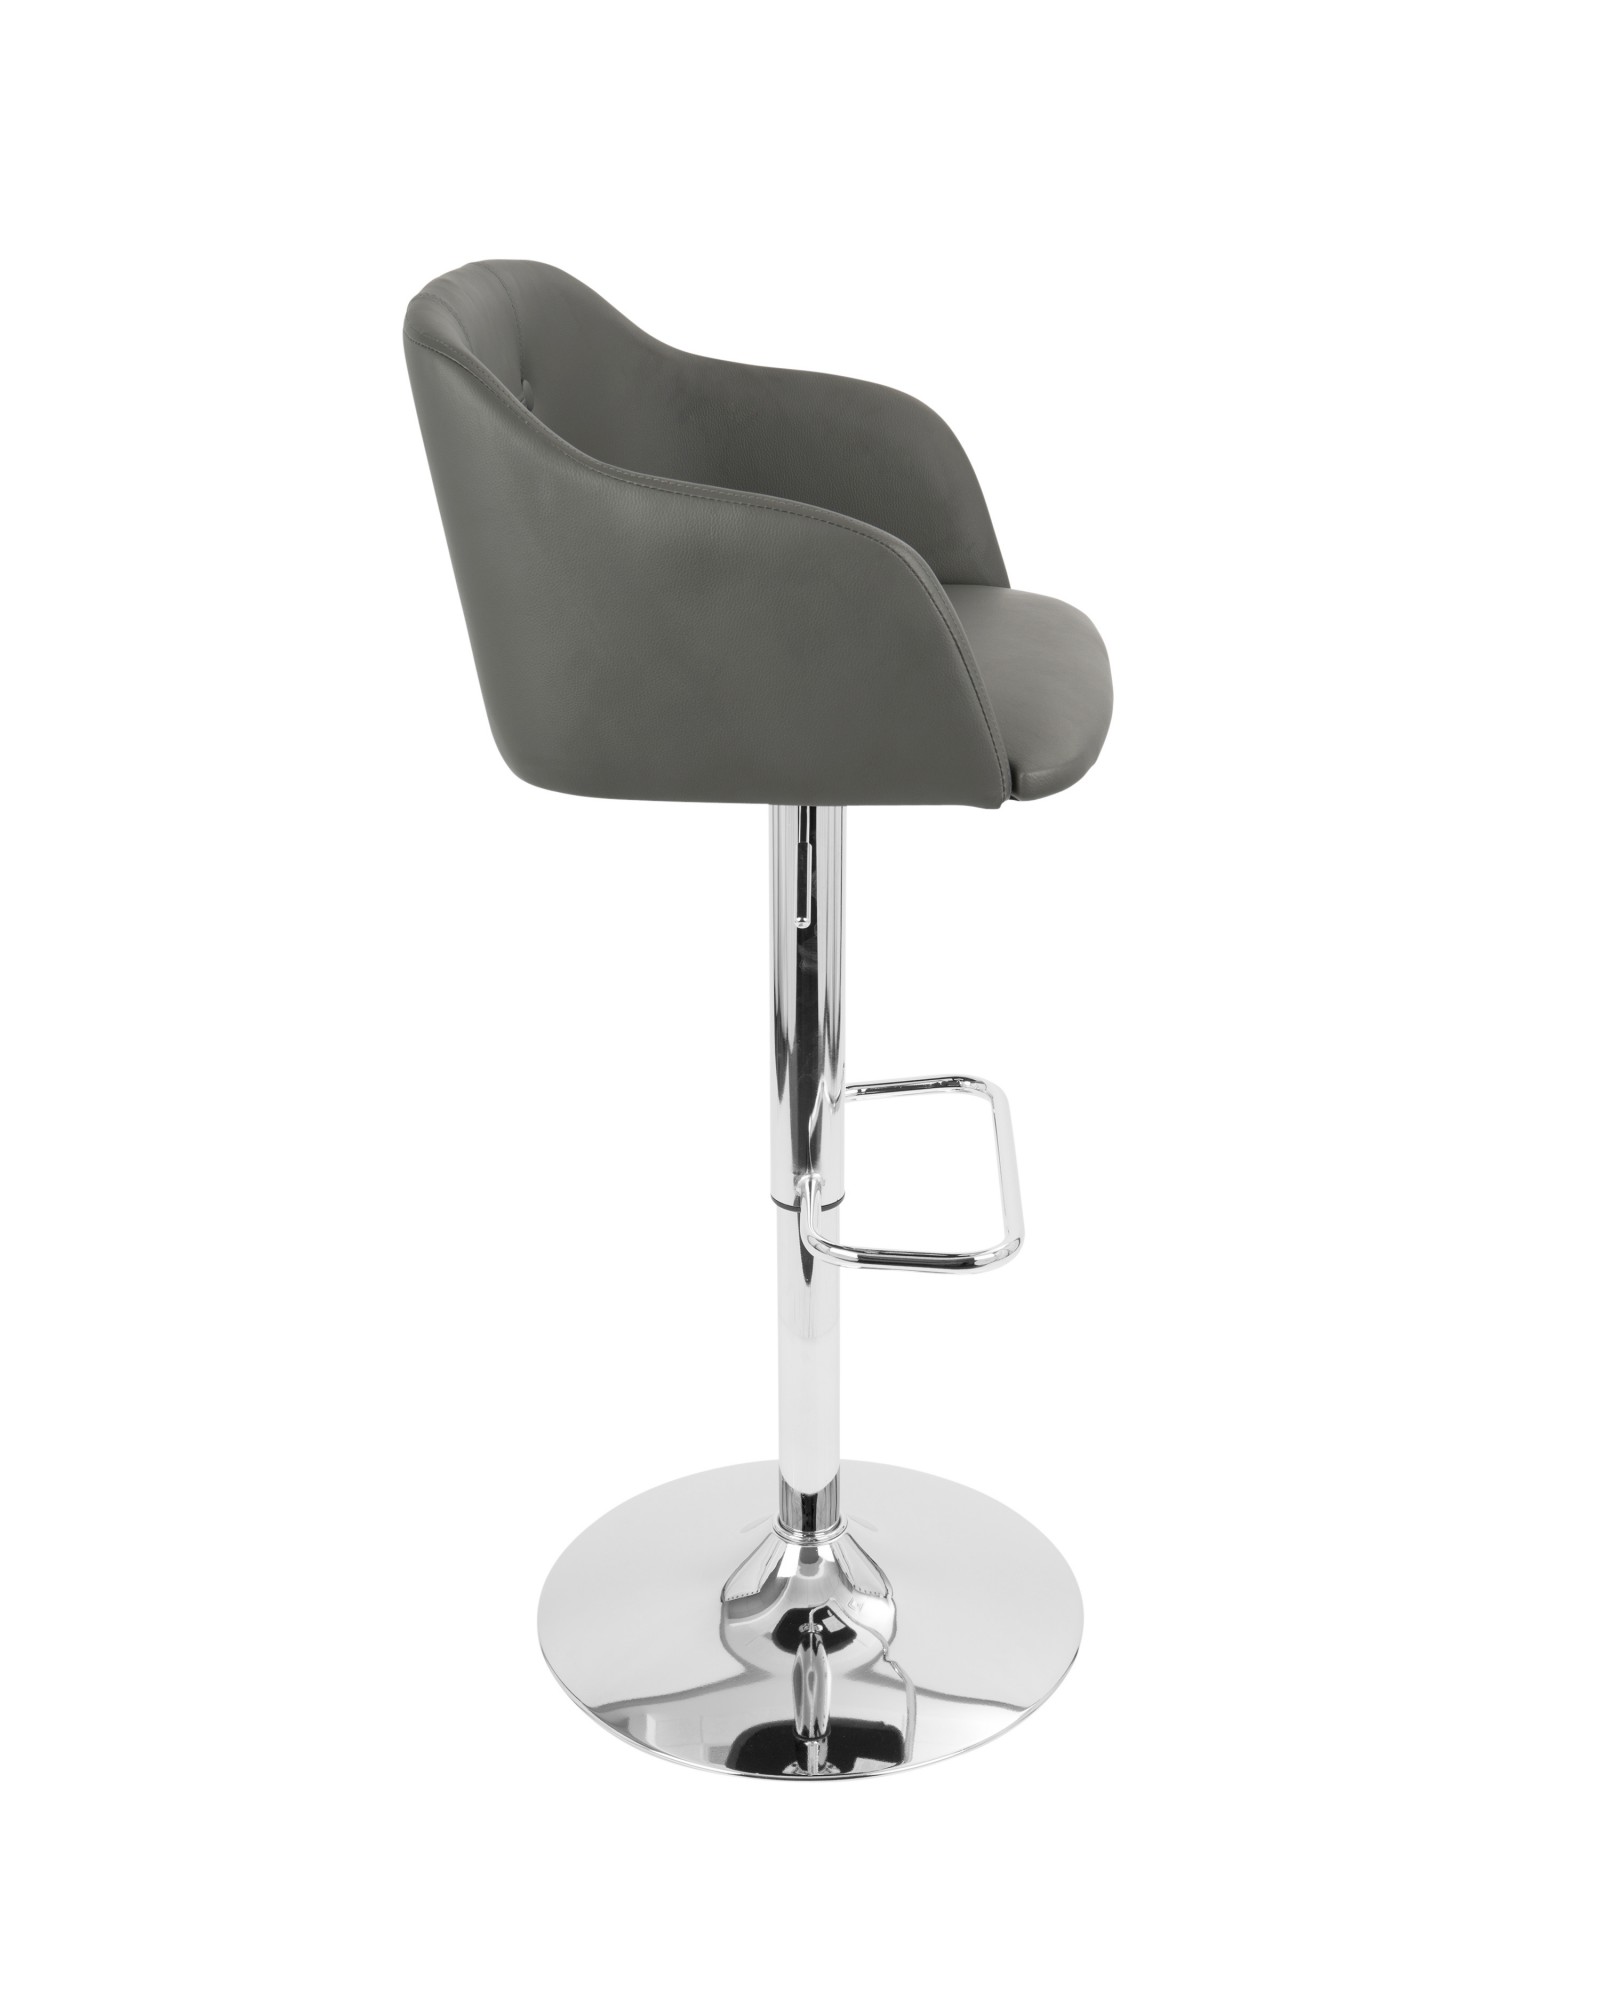 Campania Mid-Century Modern Adjustable Barstool with Swivel in Grey Faux Leather